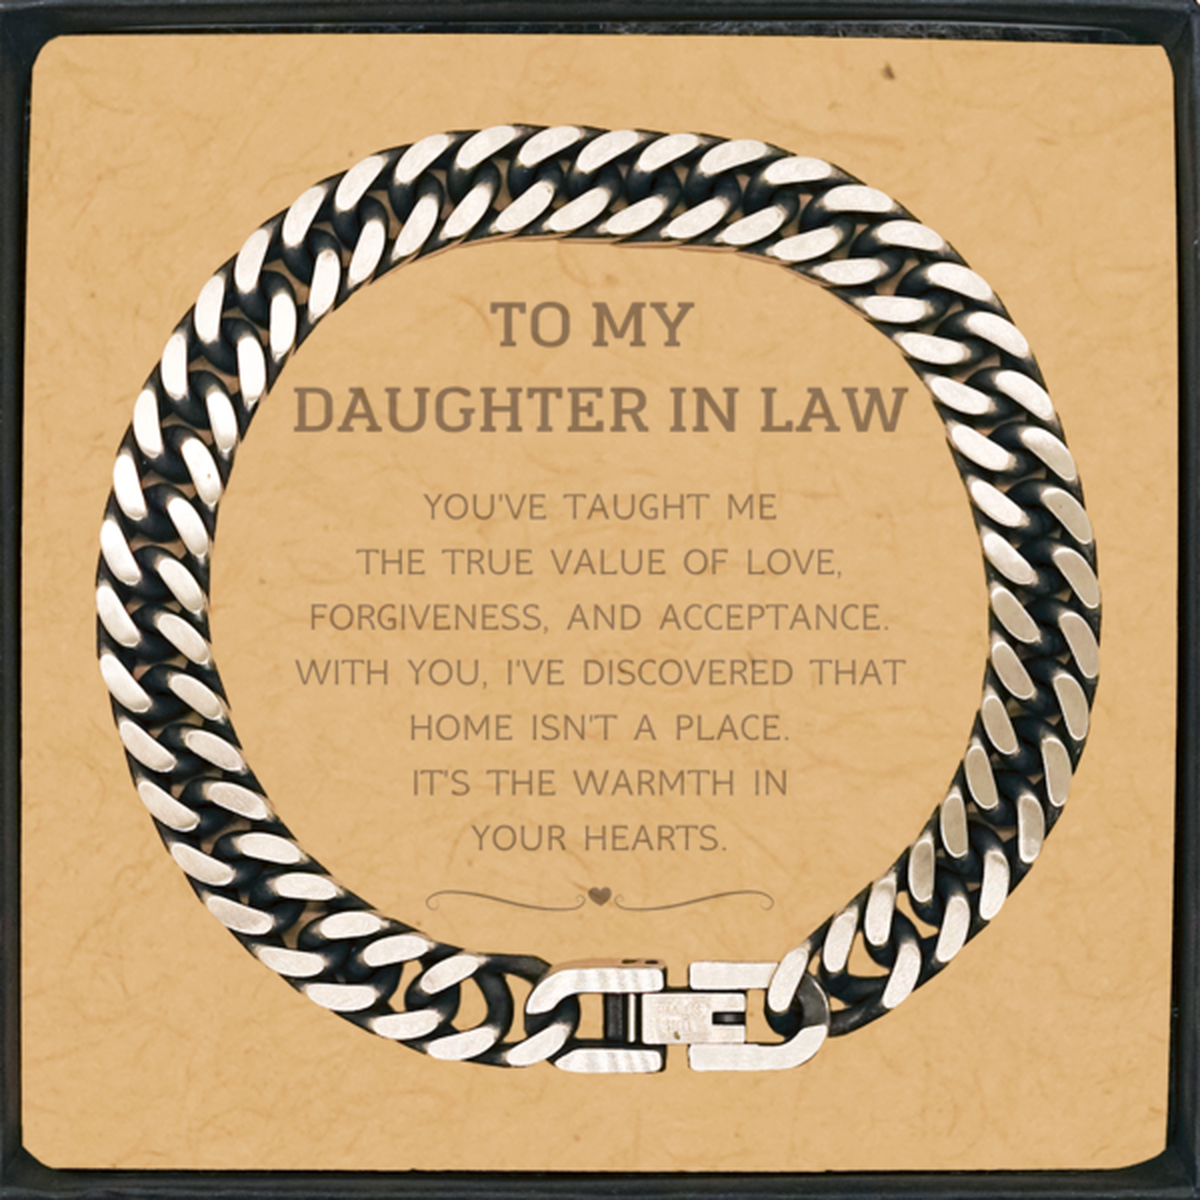 To My Daughter In Law Gifts, You've taught me the true value of love, Thank You Gifts For Daughter In Law, Birthday Cuban Link Chain Bracelet For Daughter In Law